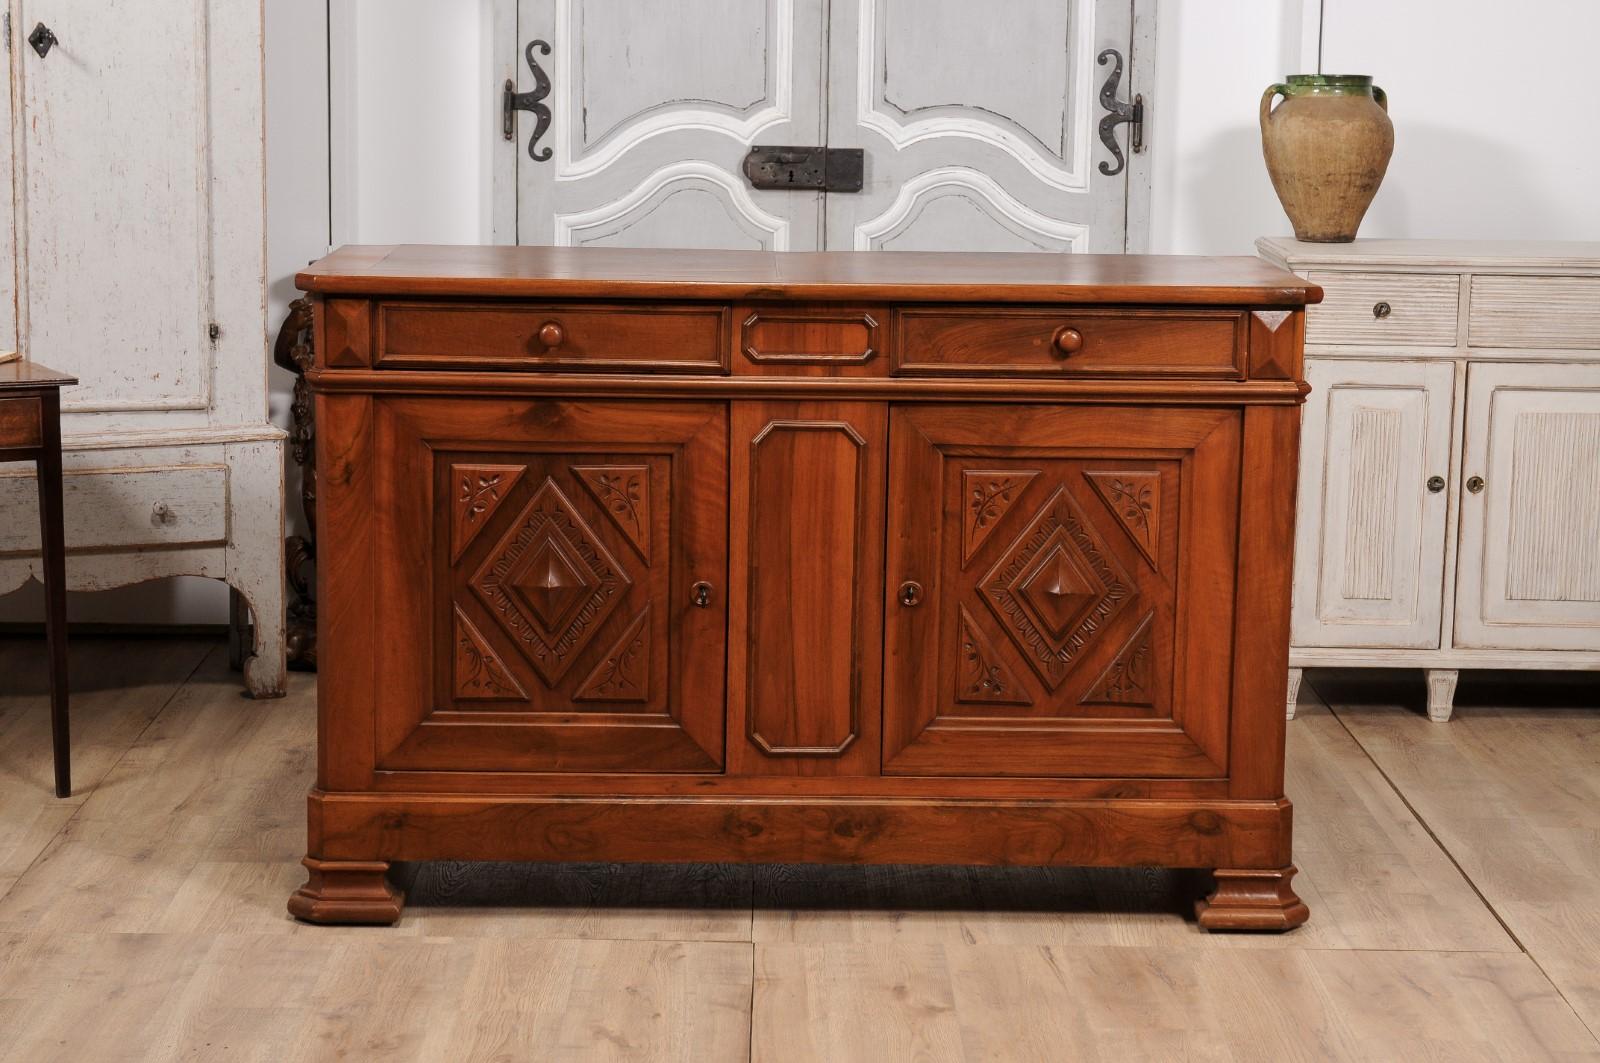 Italian 19th Century Walnut Buffet with Carved Diamond and Floral Motifs For Sale 9